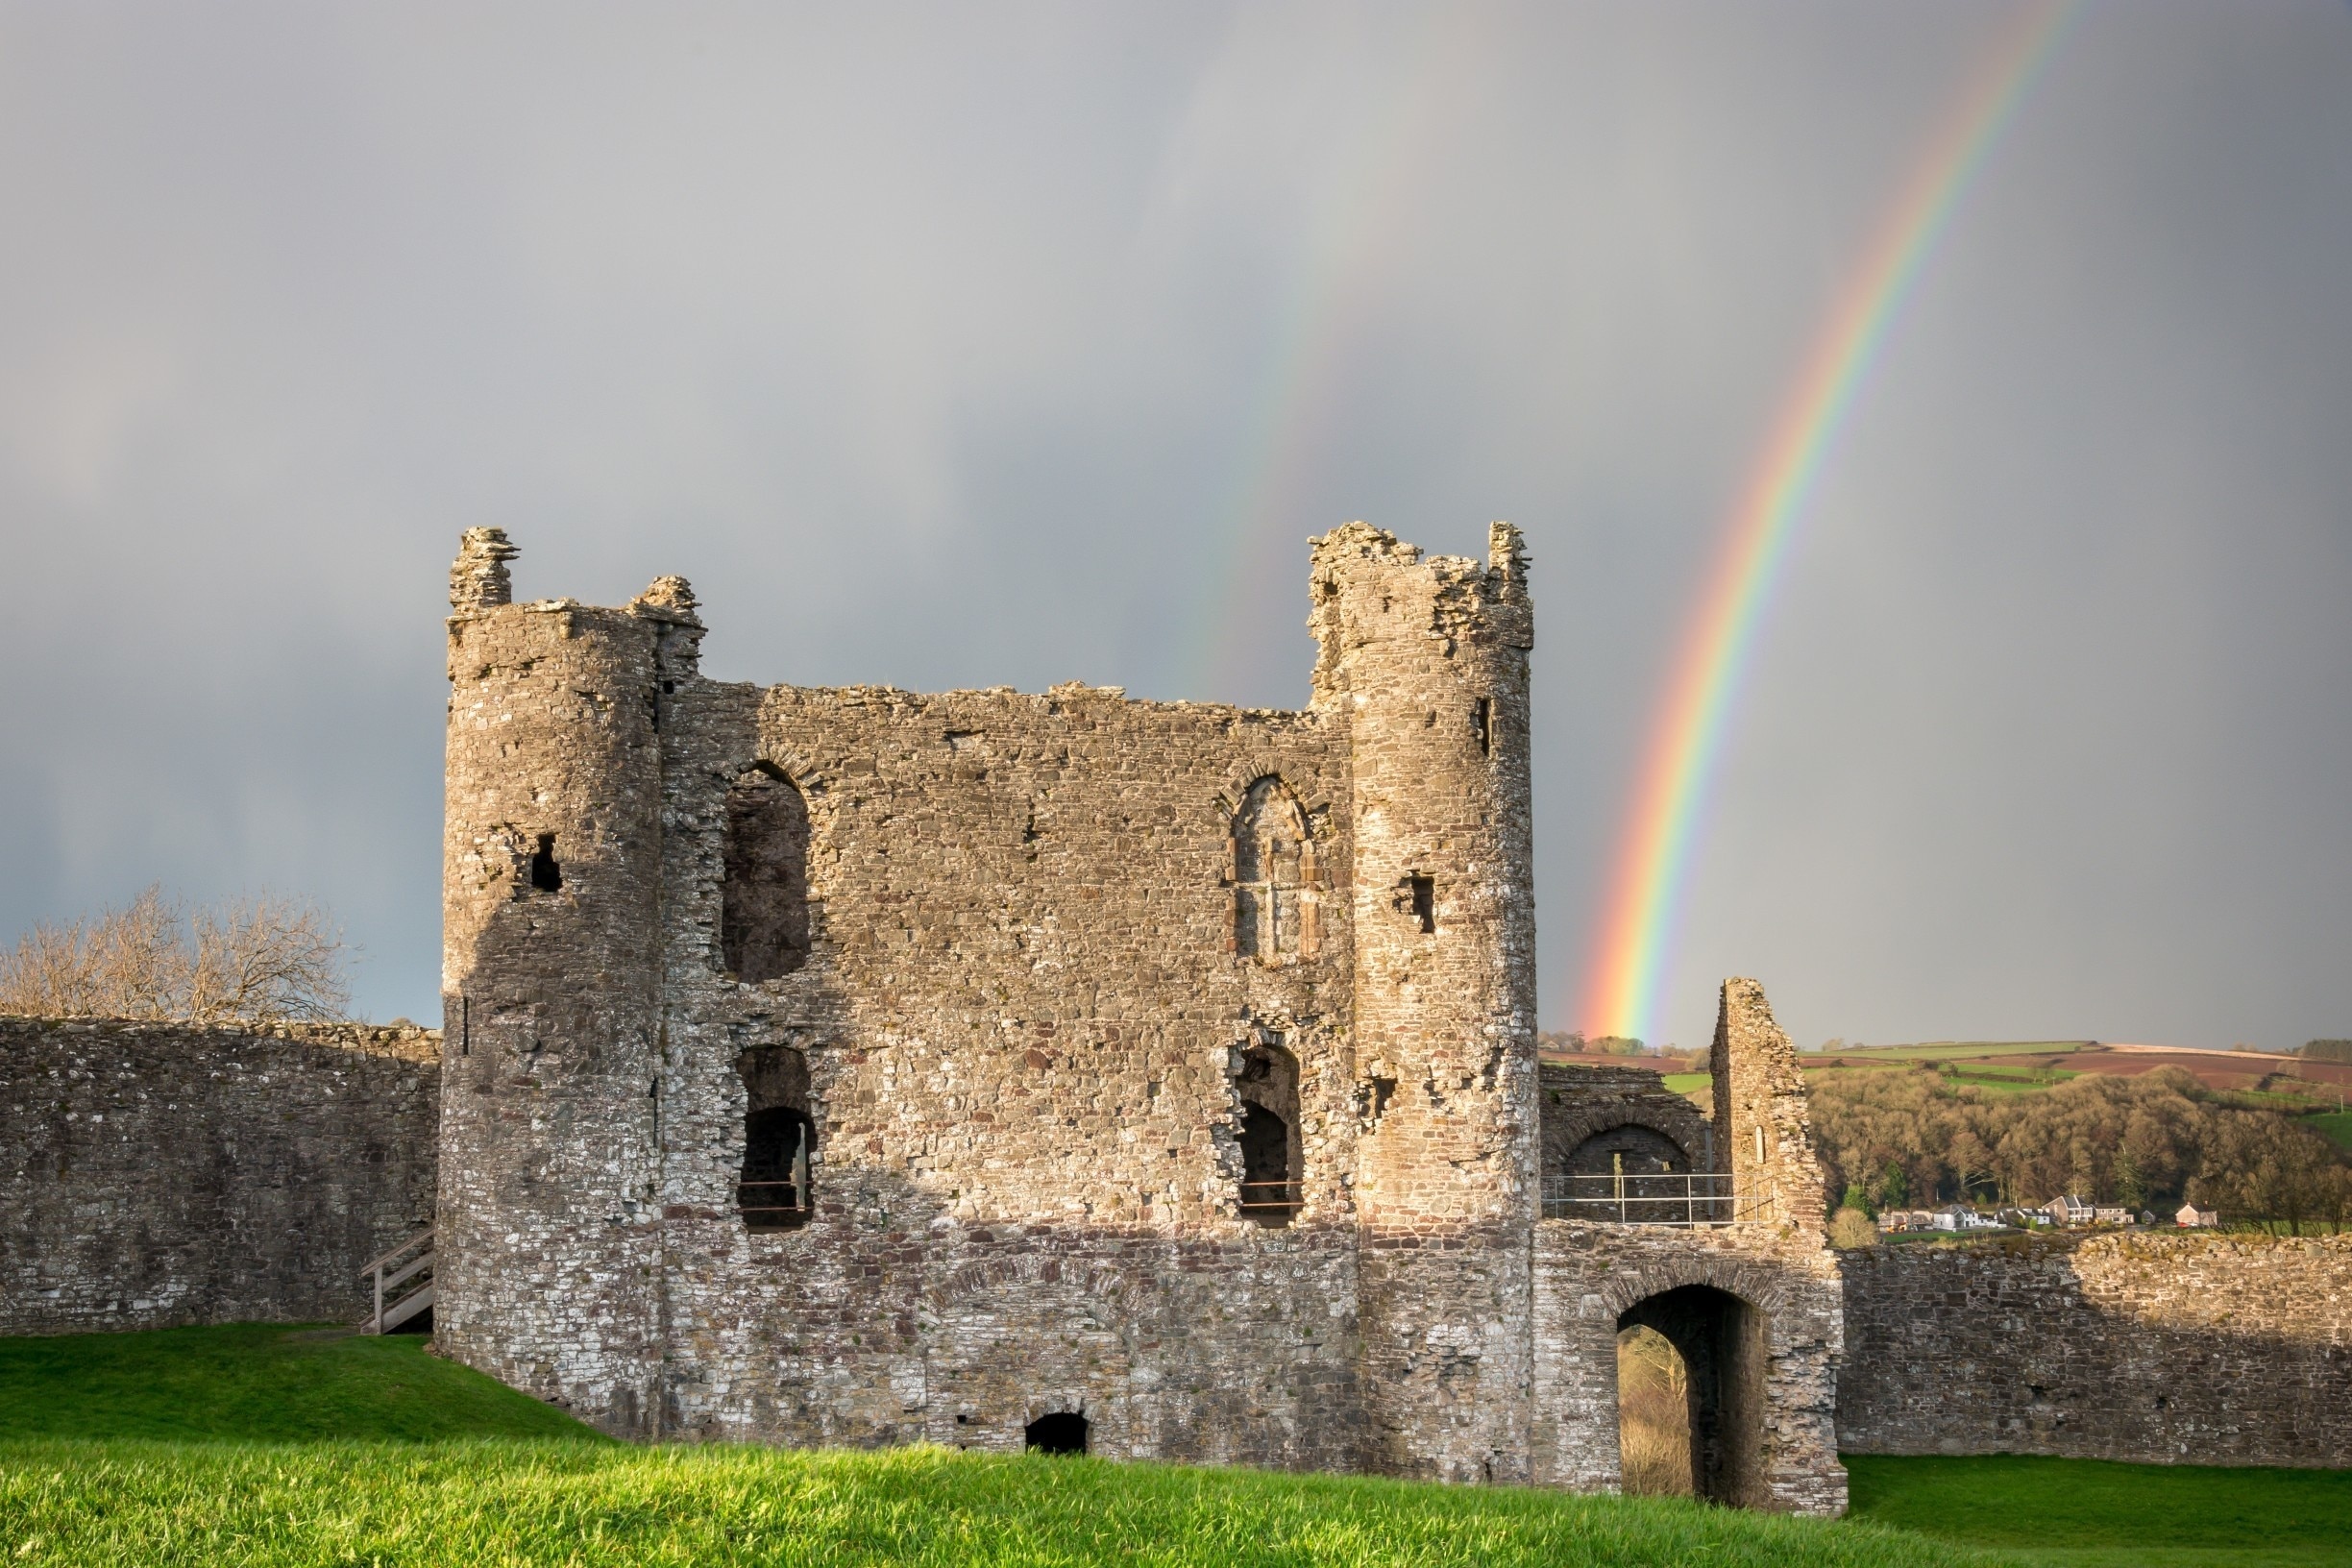 So lucky to capture the double rainbow effect from the ancient castle grounds in West Wales. 